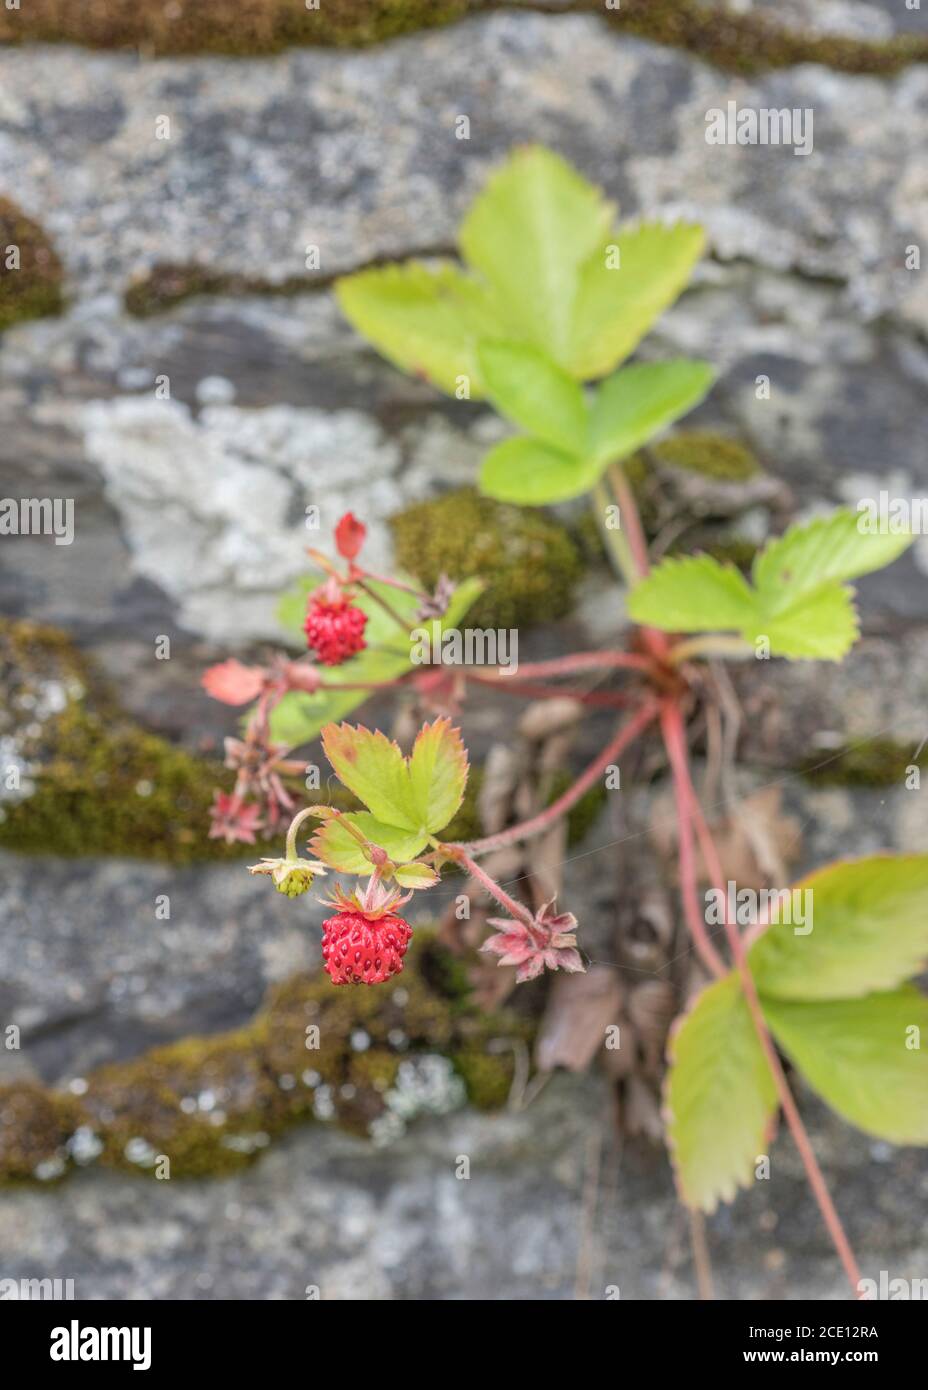 Macro close-up of early developing and tiny Wild Strawberry / Fragaria vesca fruits in August sunshine. A real hedgerow / countryside wild food treat! Stock Photo